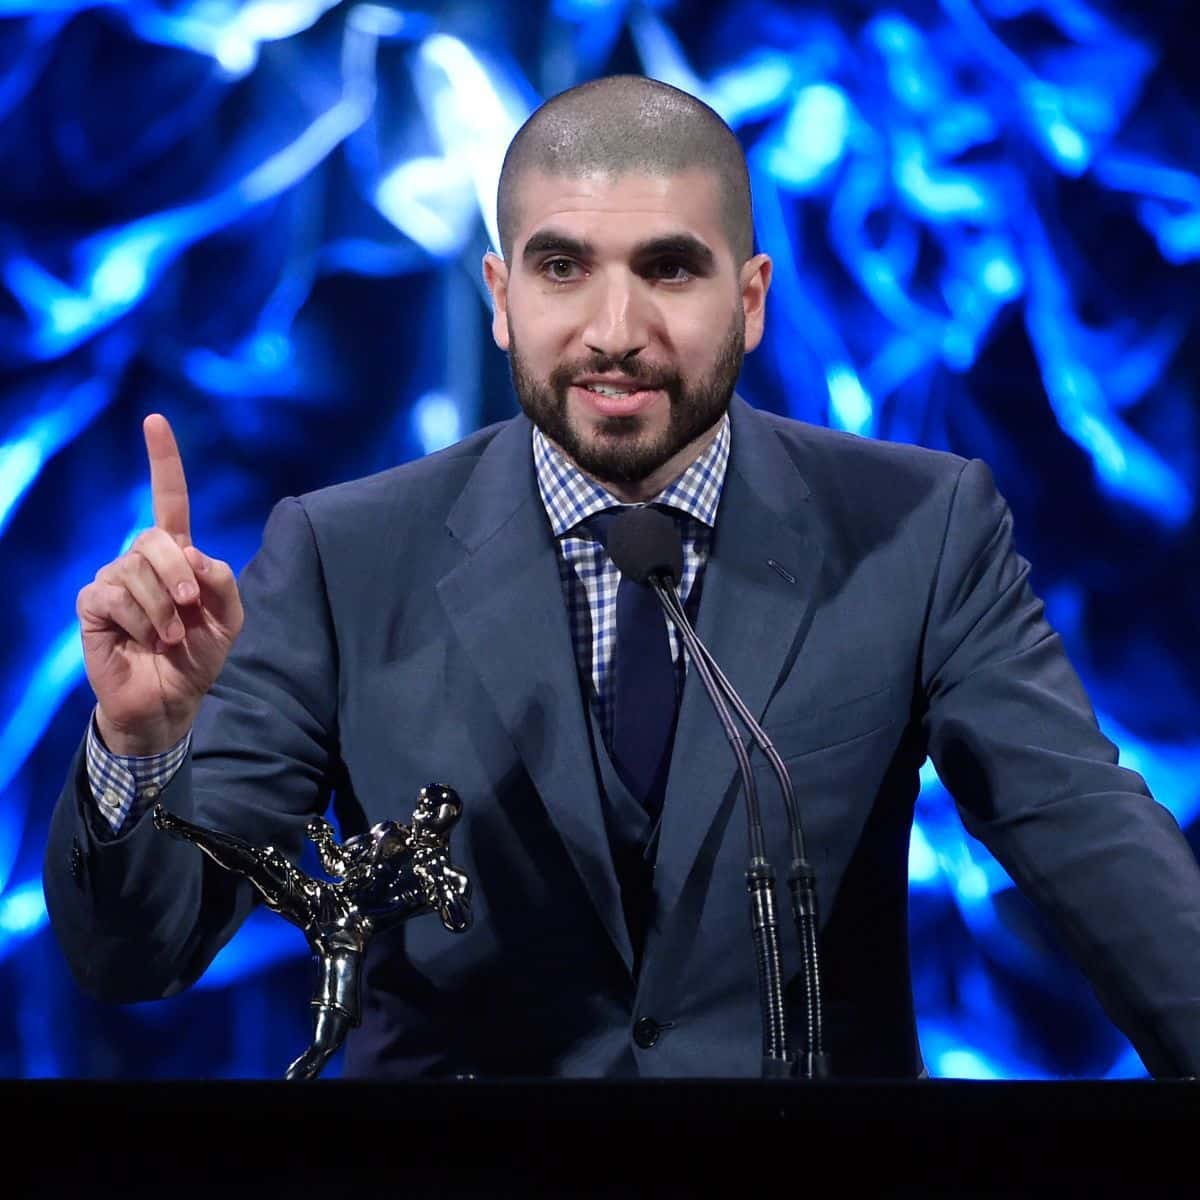 what is the net worth of Ariel Helwani